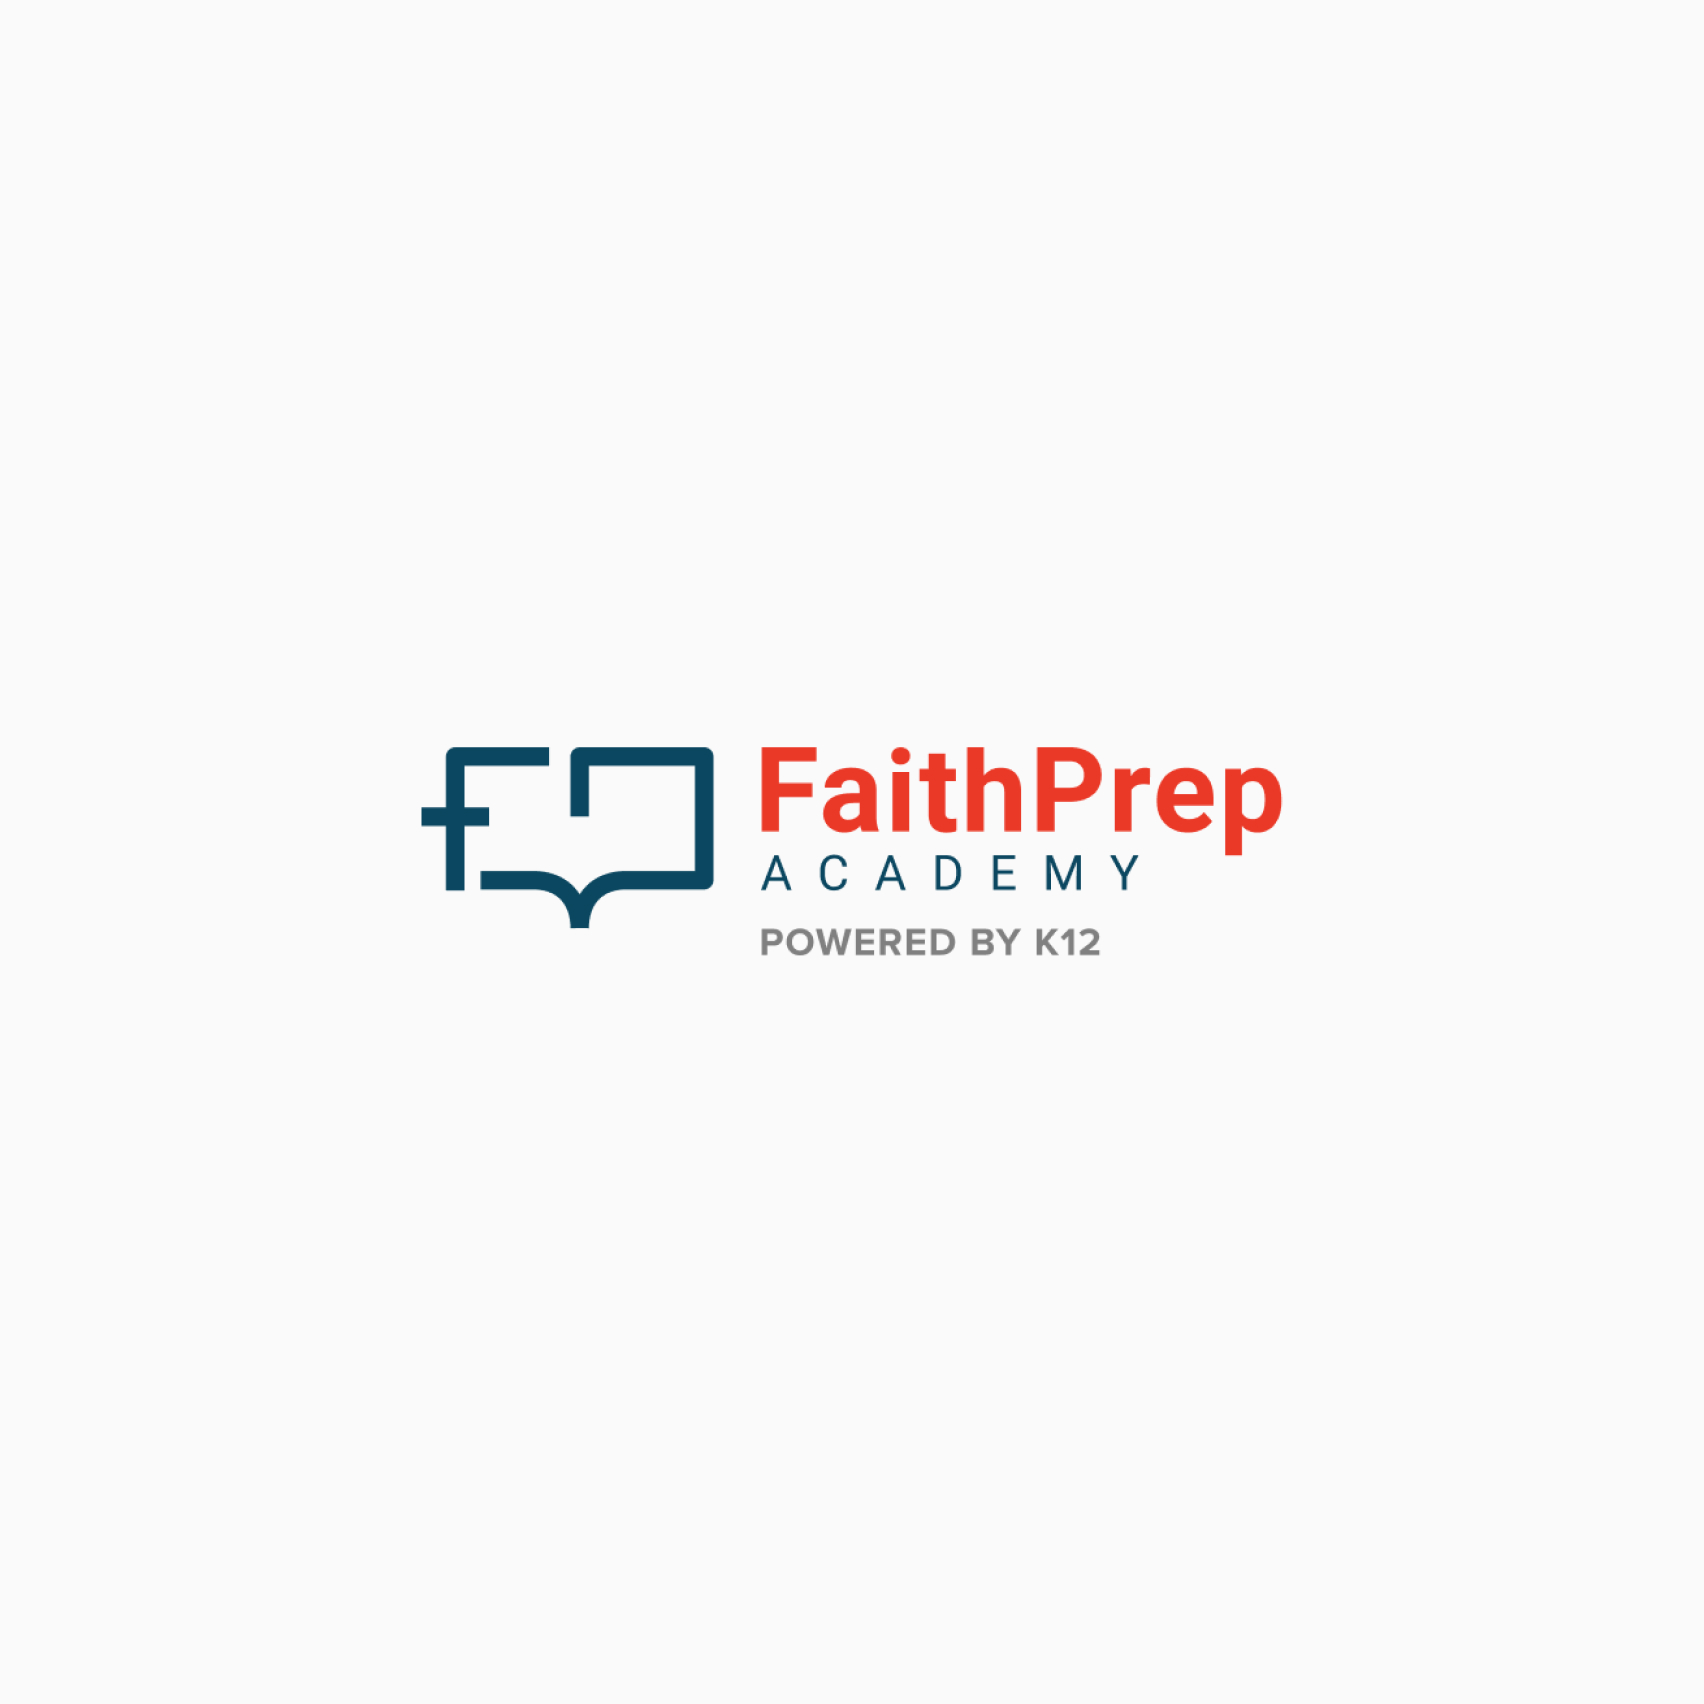 Tuition and Costs image 7 (name Faith Prep)